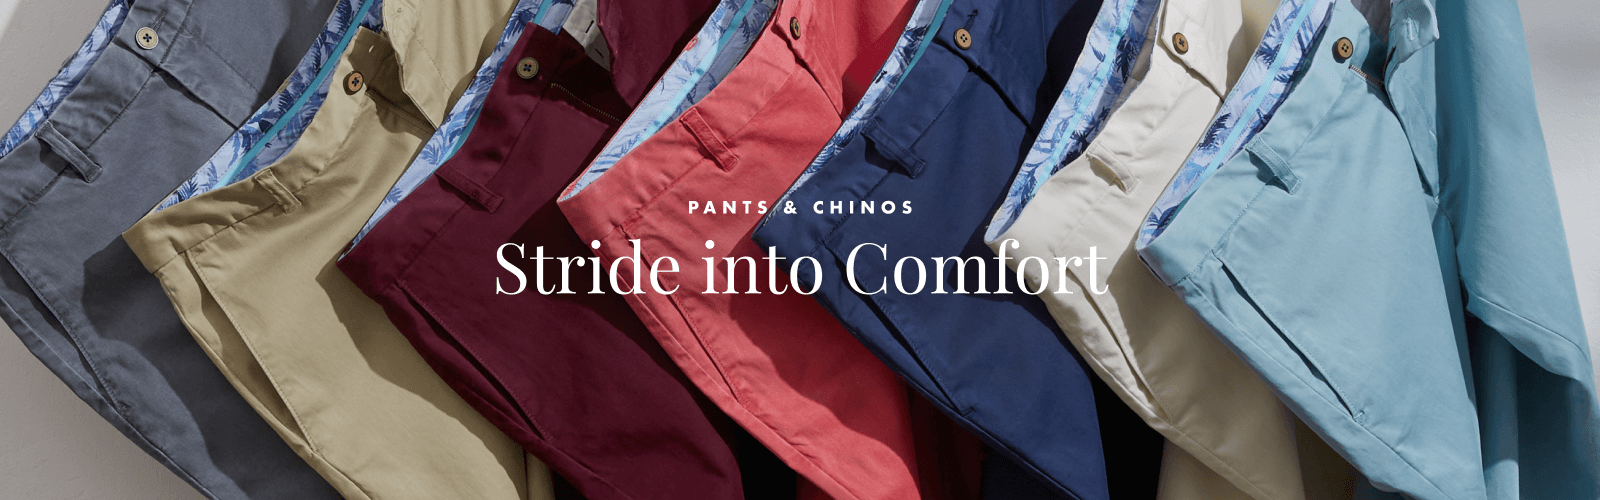 Pants & Chinos: Stride into Comfort